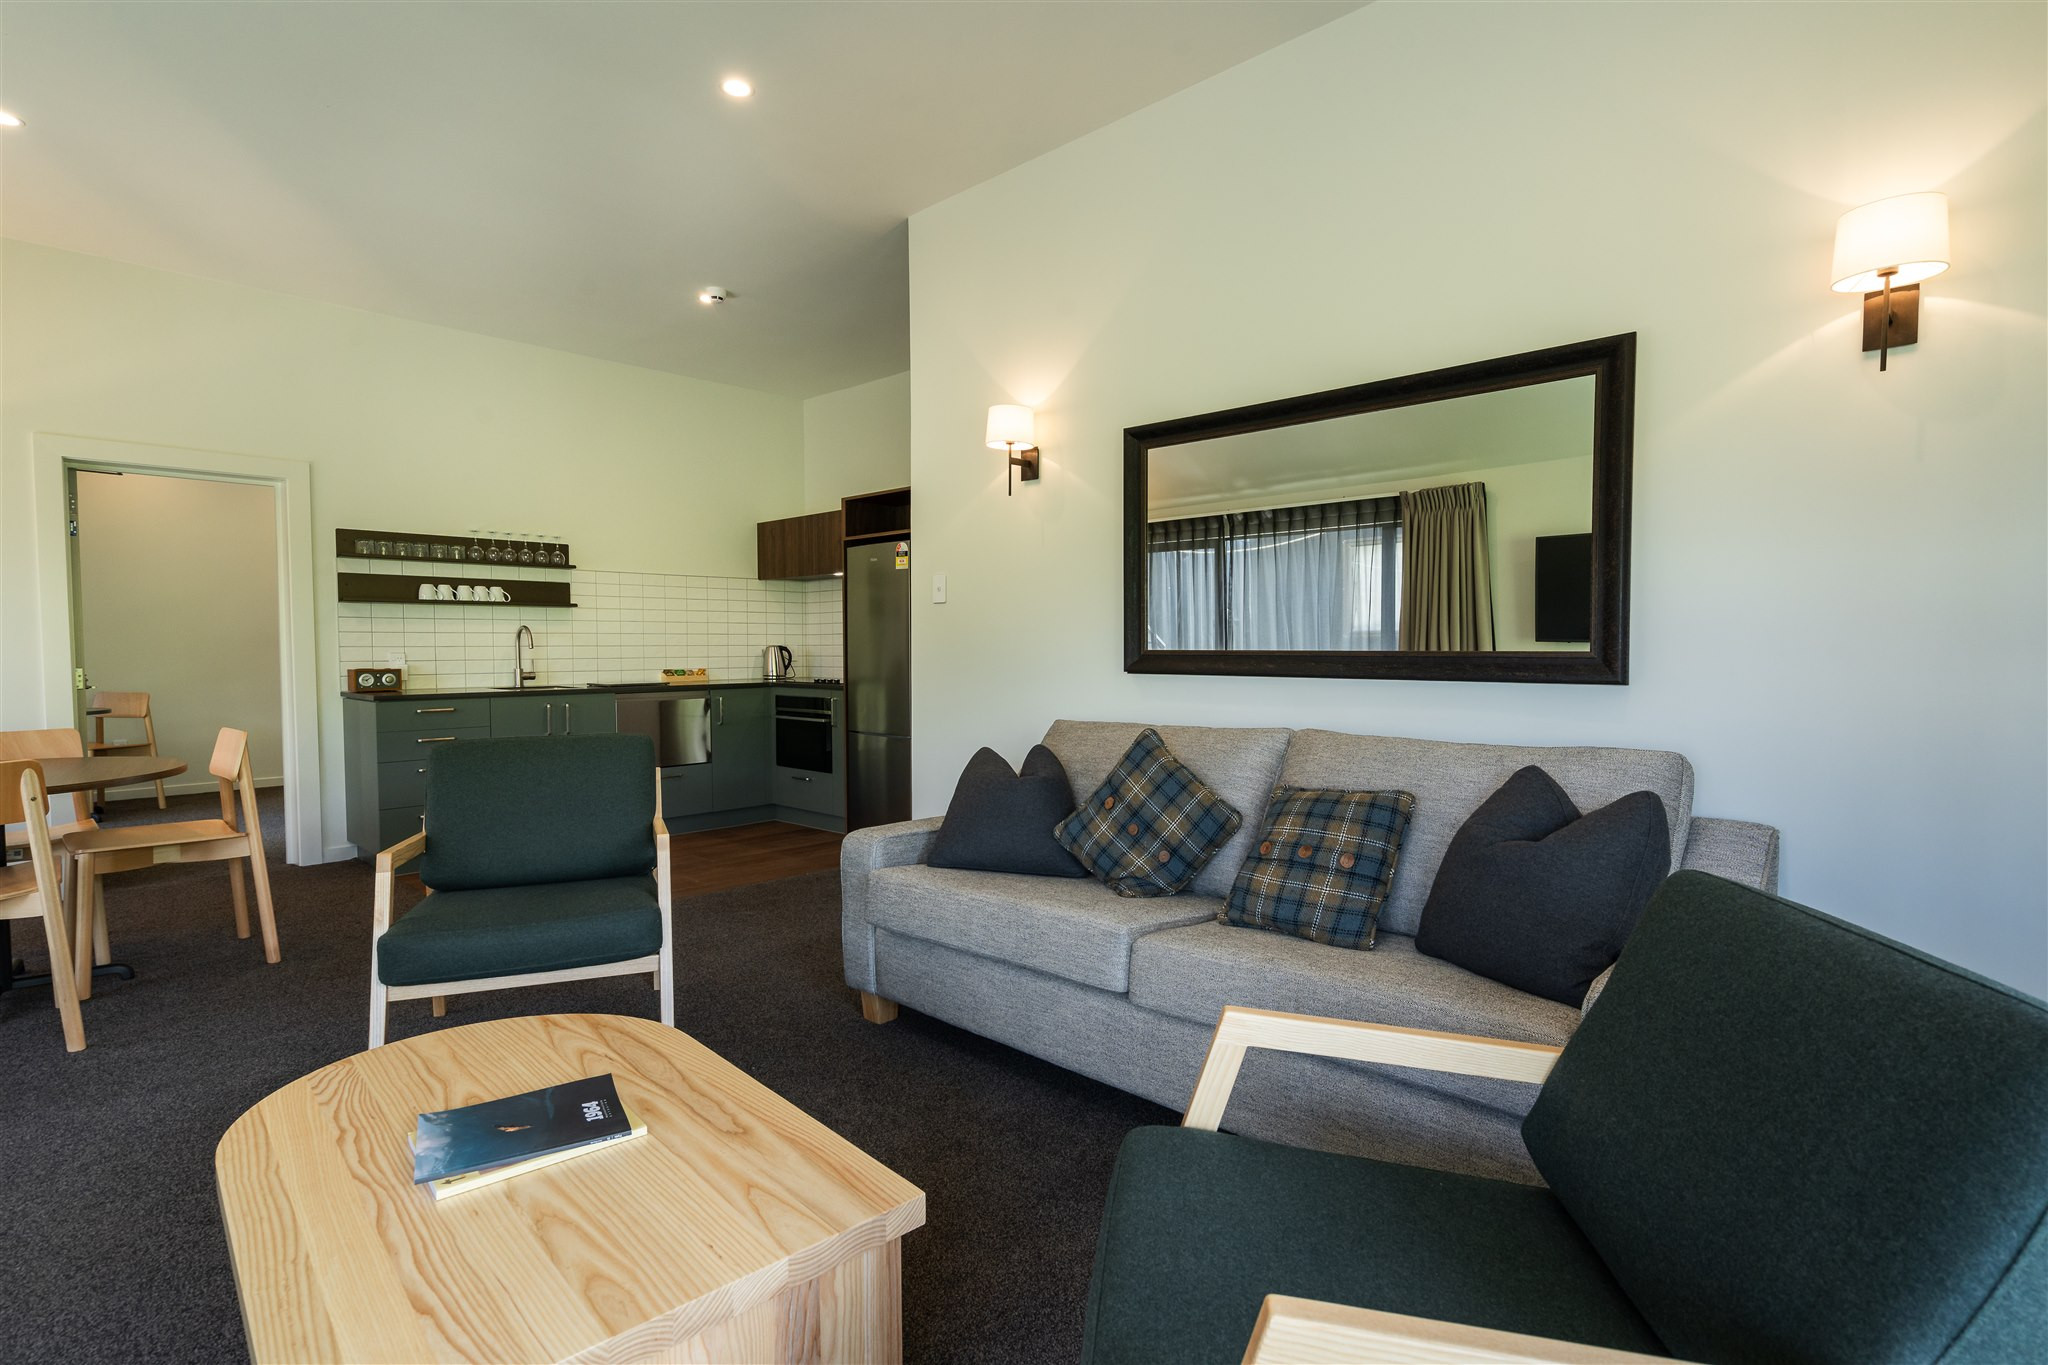 Experience cozy comfort in our newly refurbished rooms at Edgewater Hotel. Nestled by Lake Wānaka, our premium accommodations offer a relaxing retreat after a day of adventure. Book your stay today!